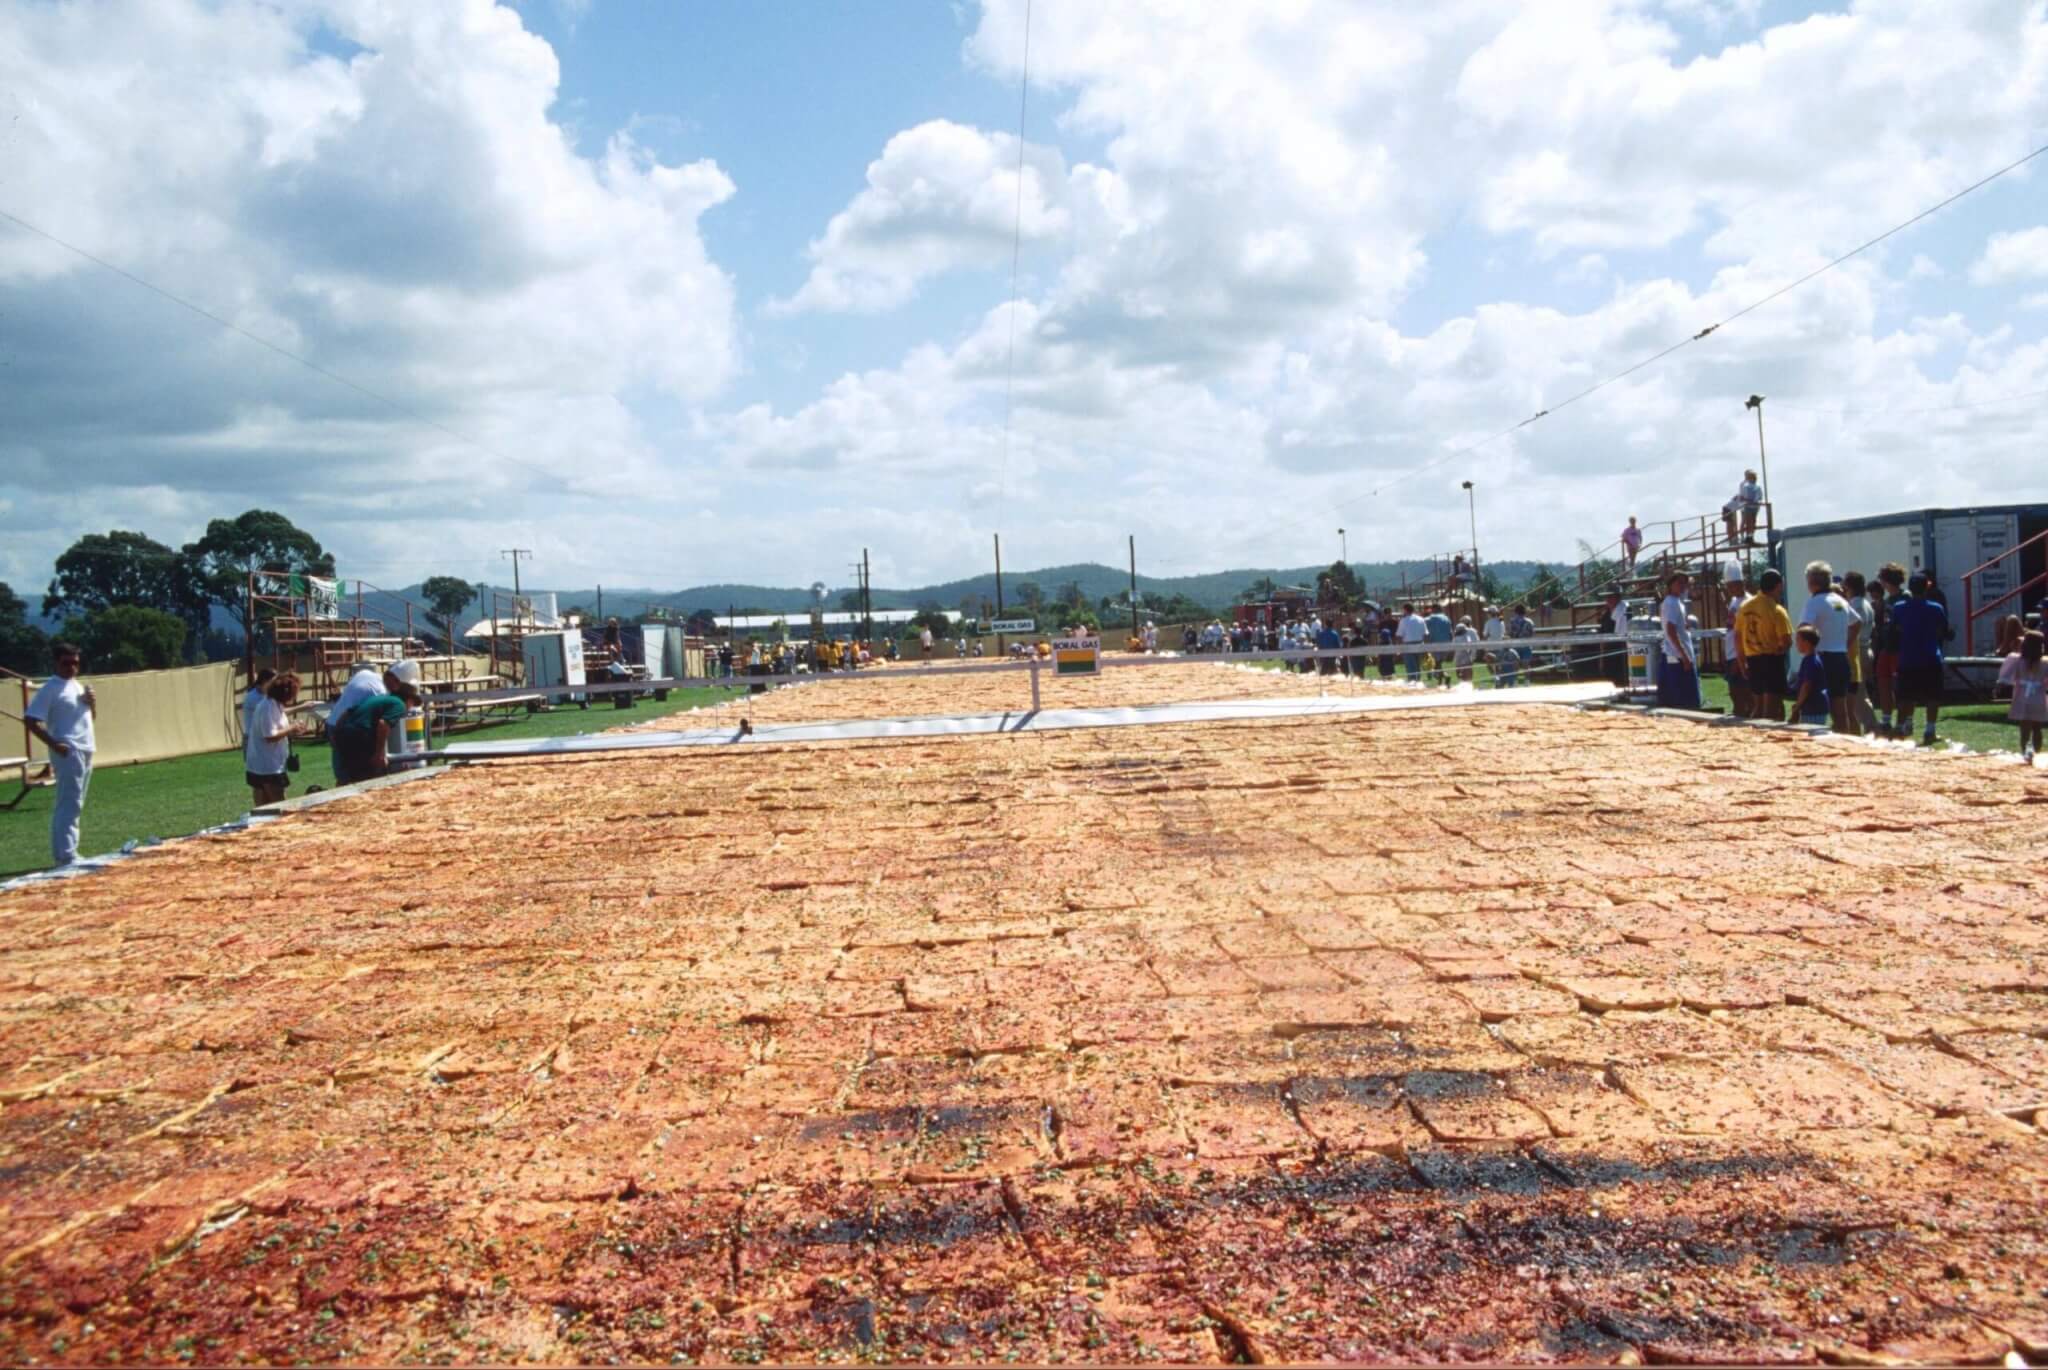 THE BIGGEST PIZZA IN THE WORLD IS COVERING A FOOTBALL PITCH